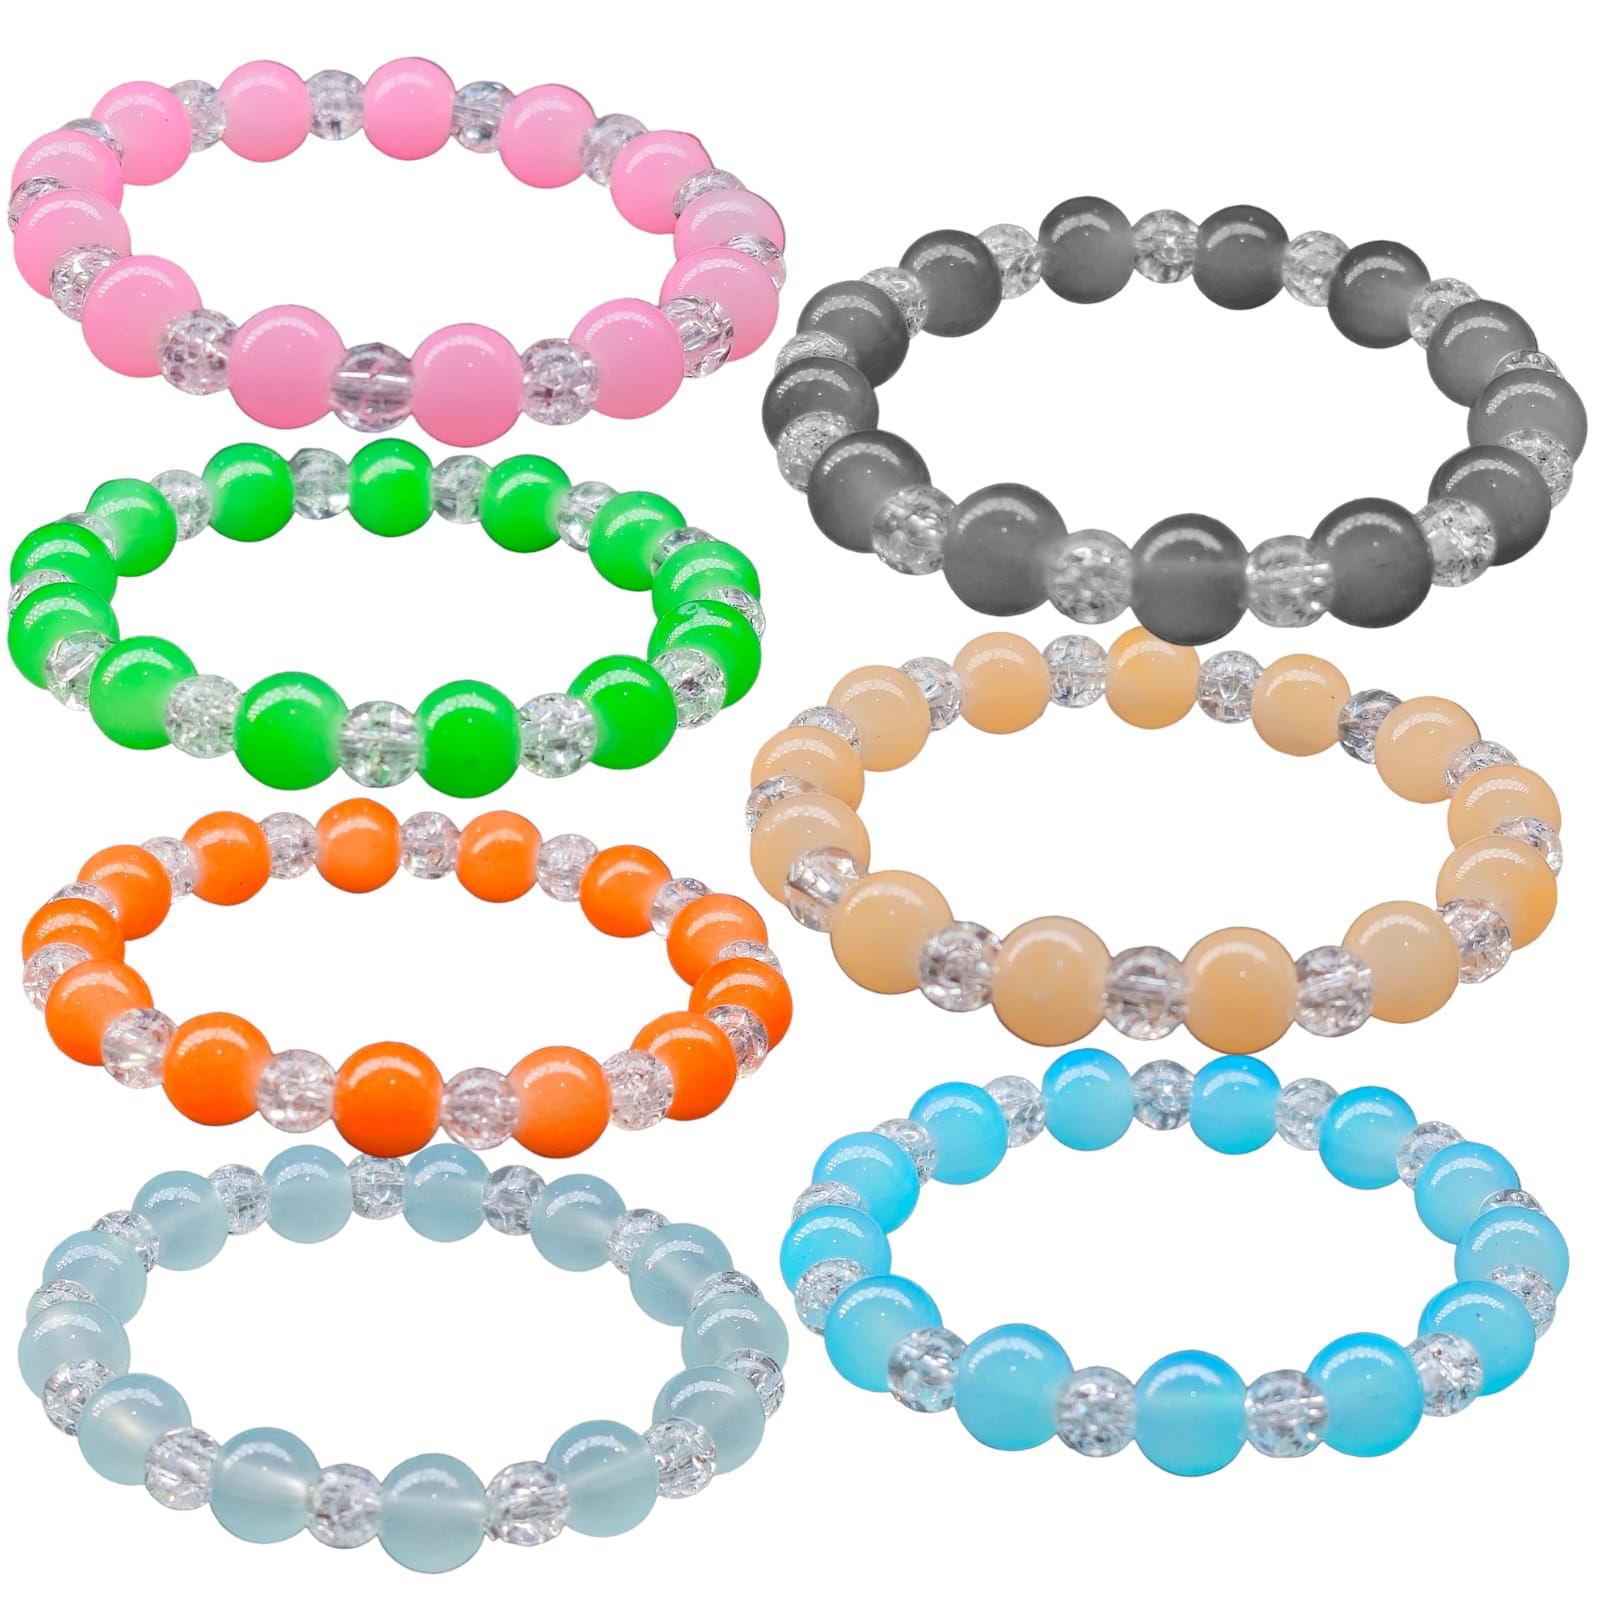 How To Make A Faceted Crystal Beaded Bracelet - Running With Sisters